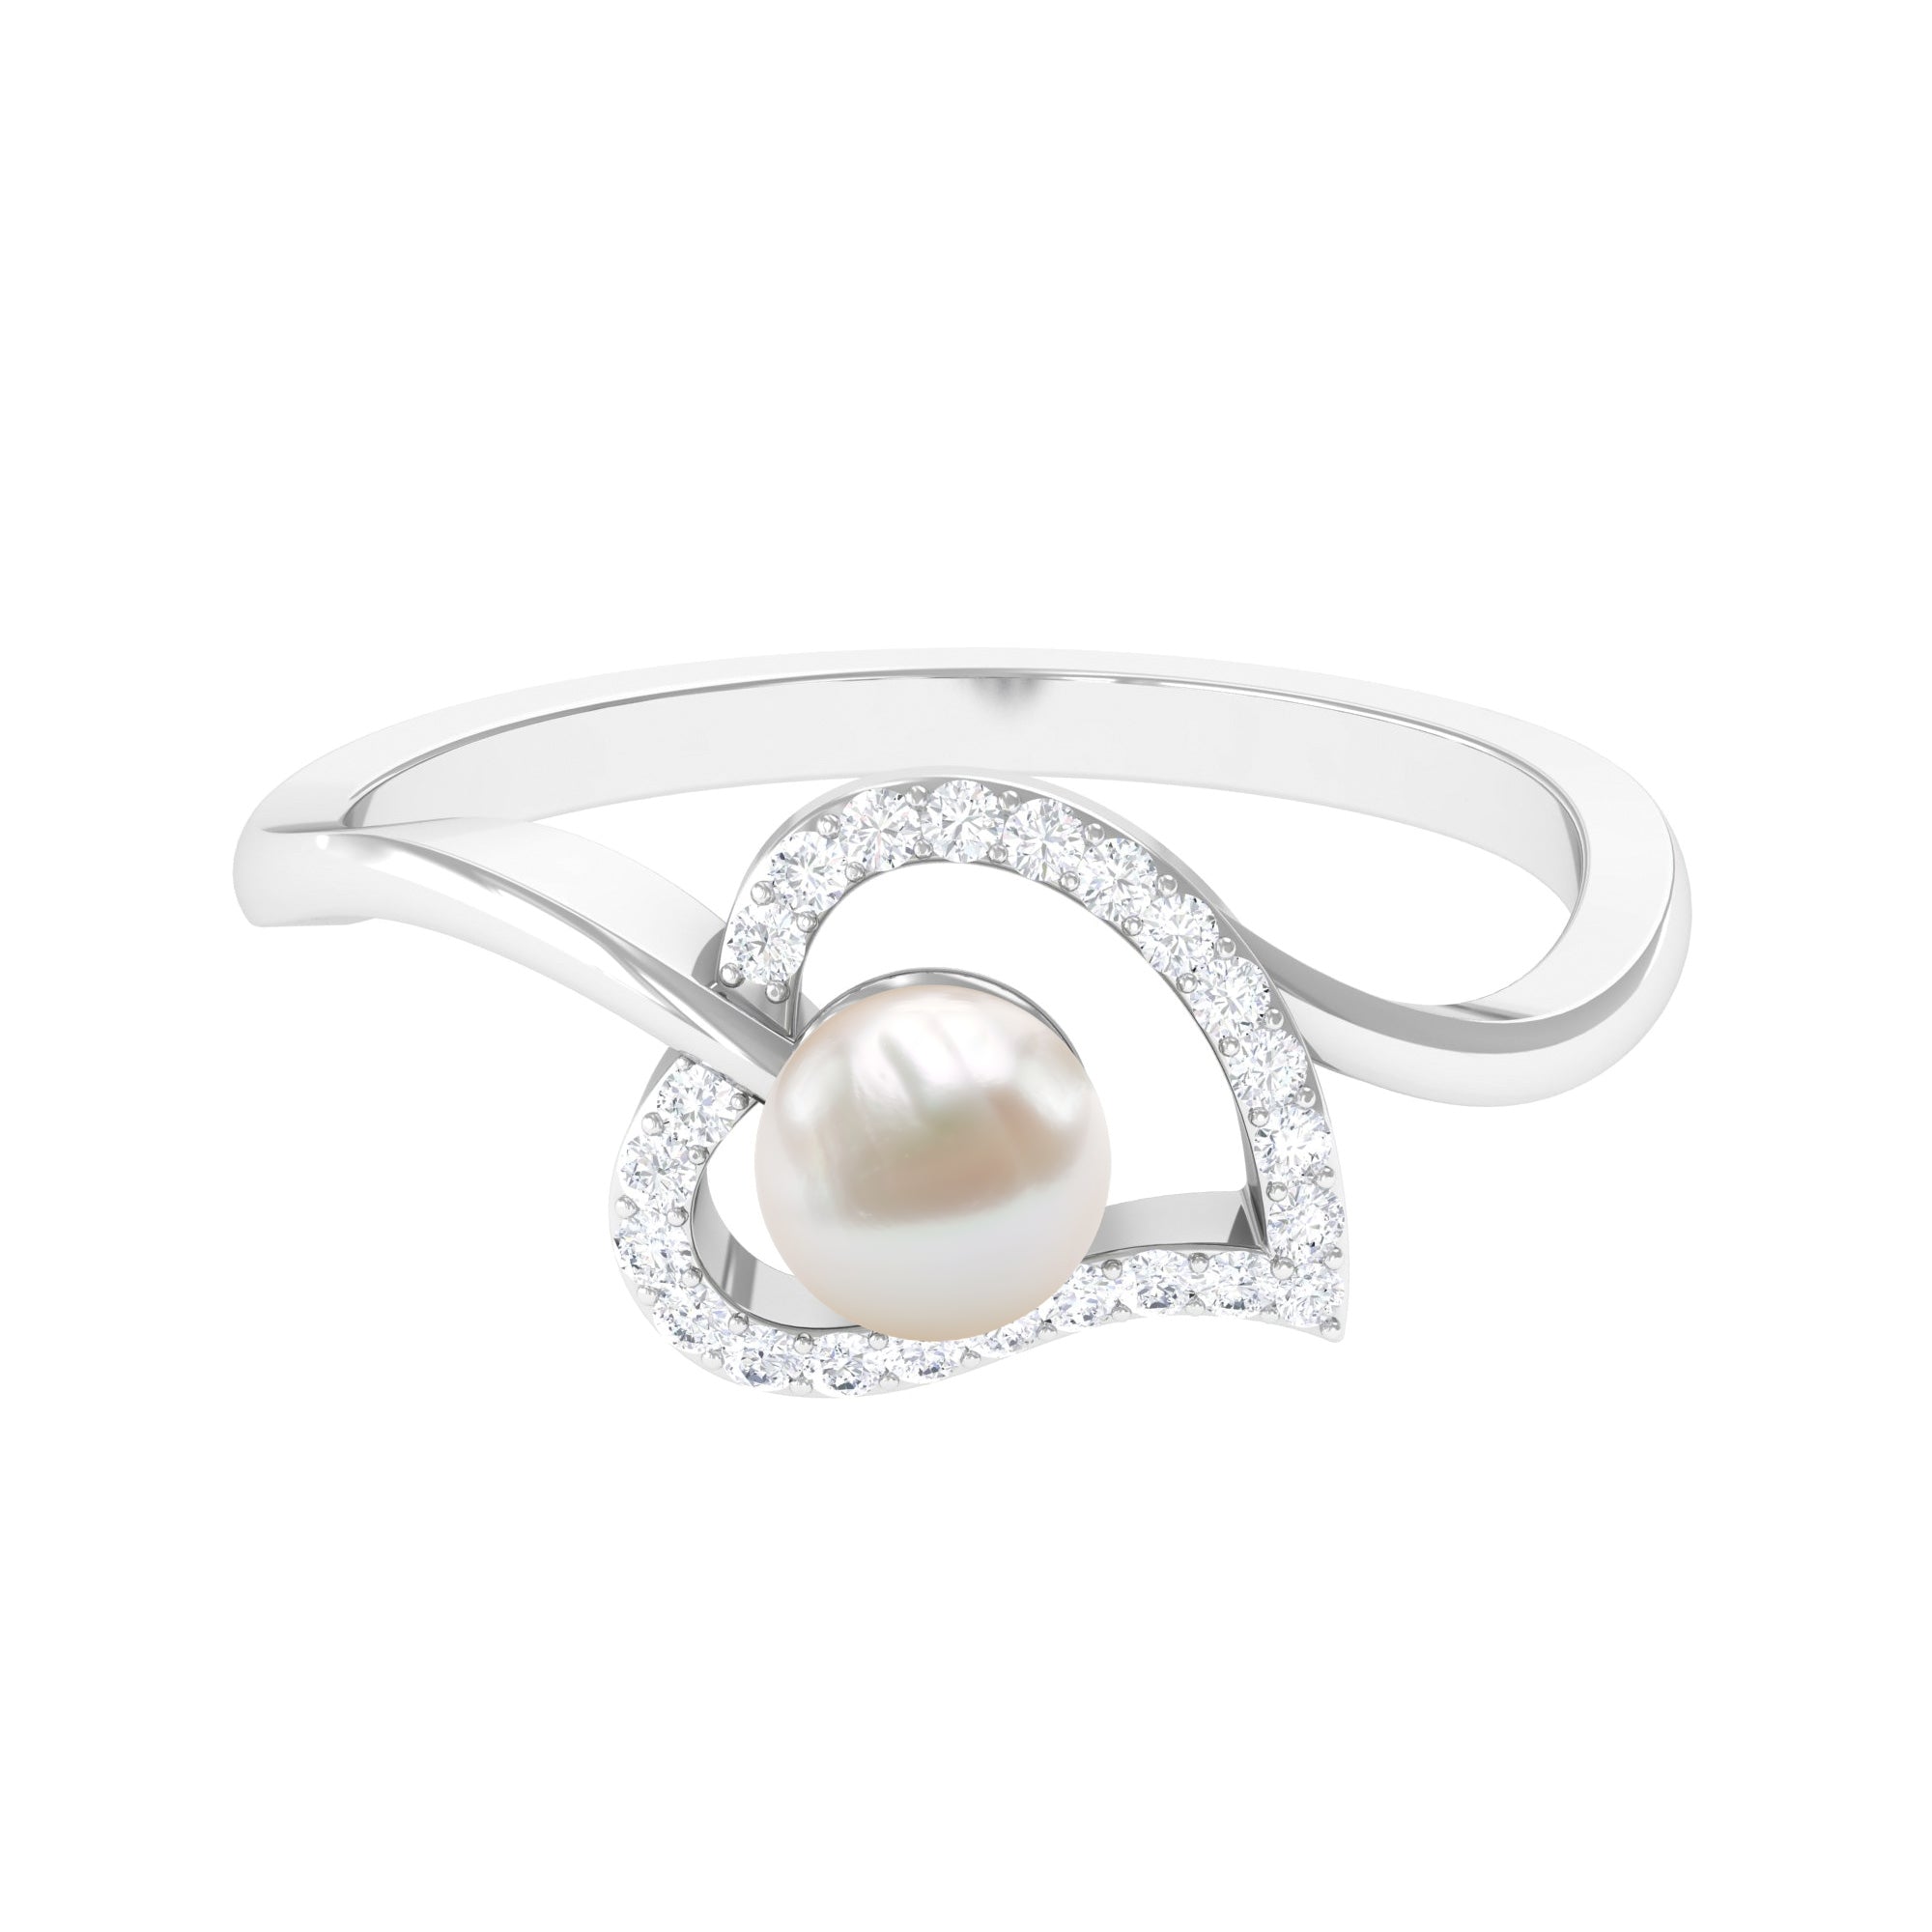 2.25 CT Freshwater Pearl and Diamond Heart Bypass Engagement Ring Freshwater Pearl - ( AAA ) - Quality - Rosec Jewels